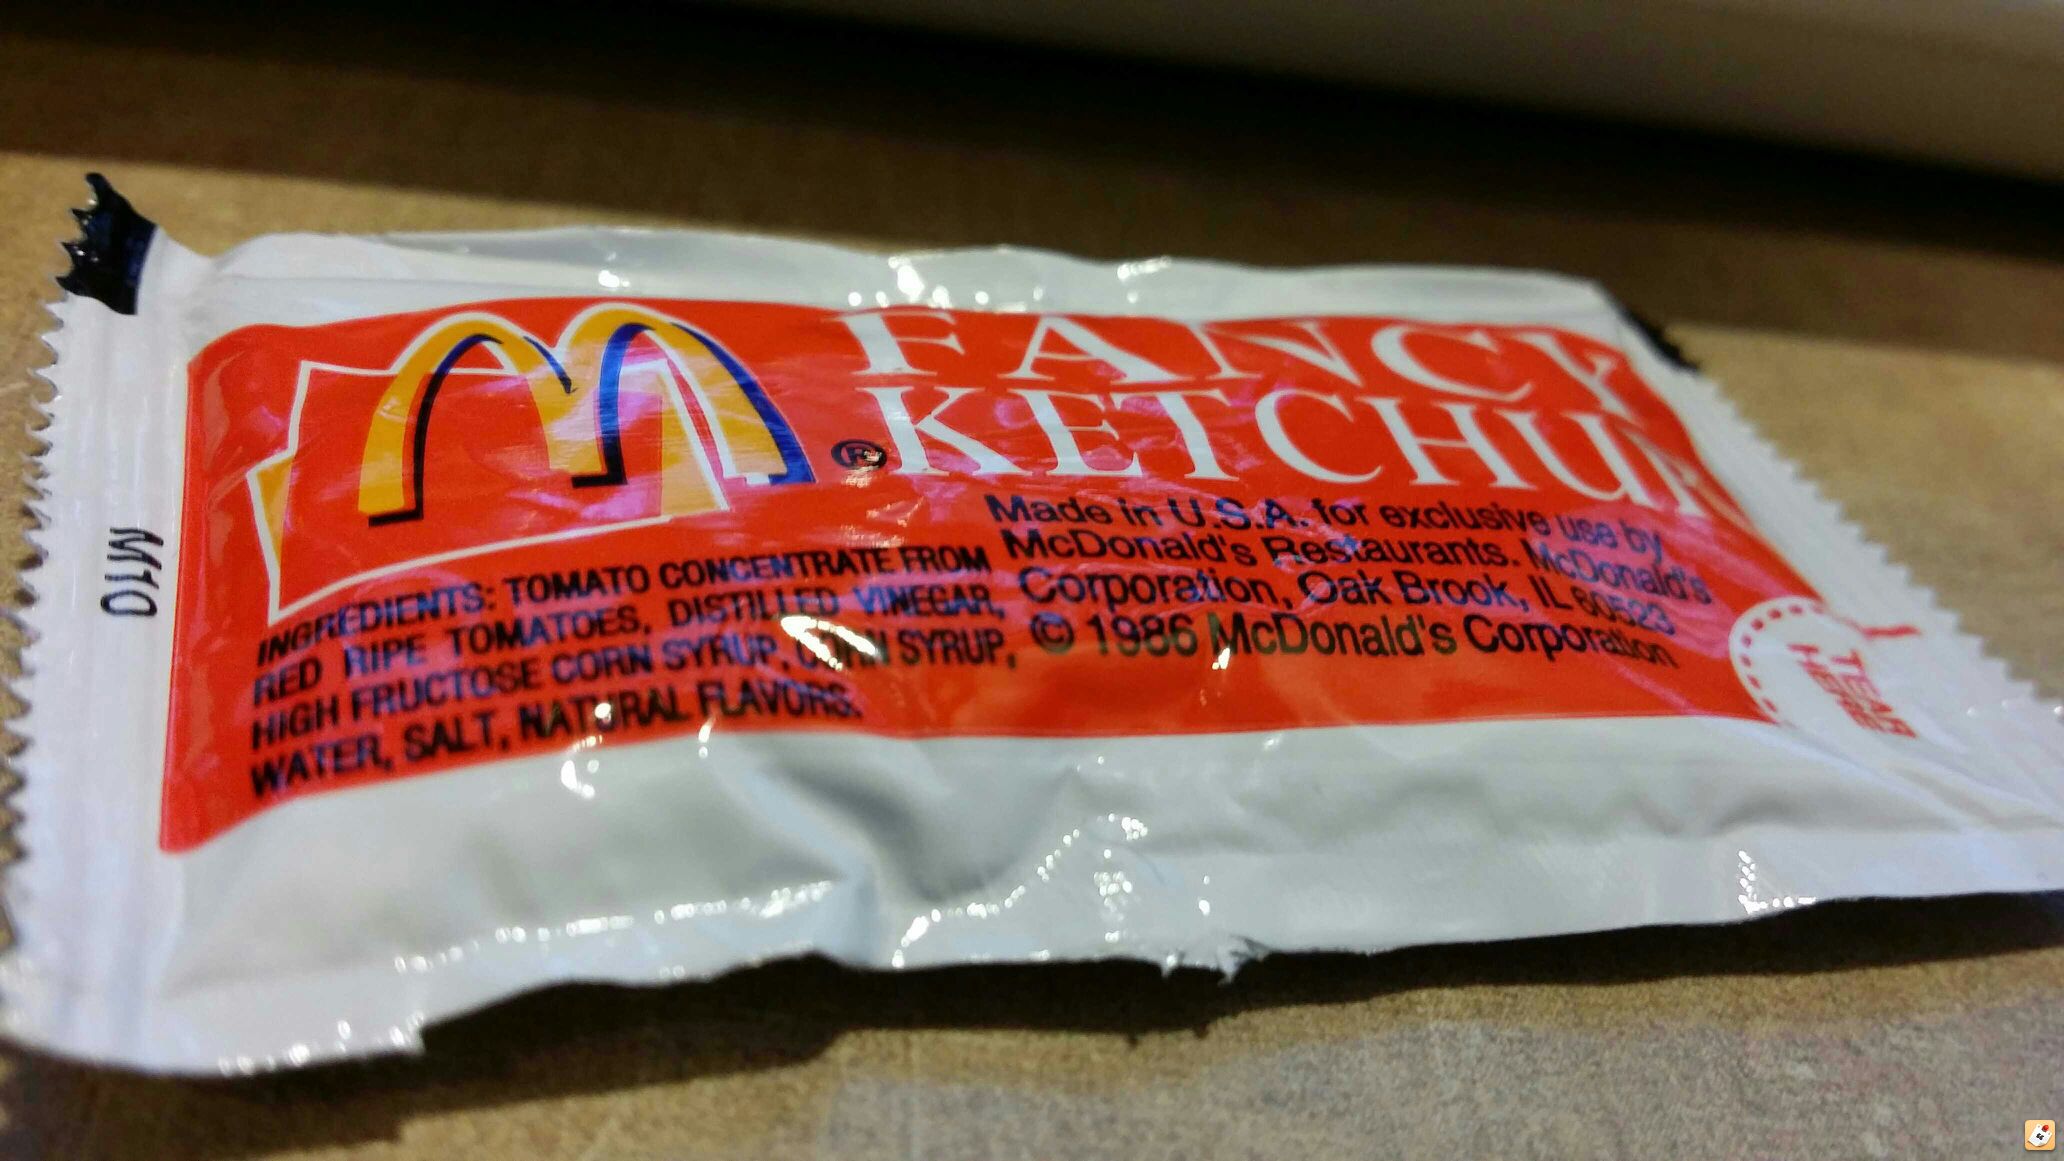 Whats the Deal with Whataburger Ketchup Packets?